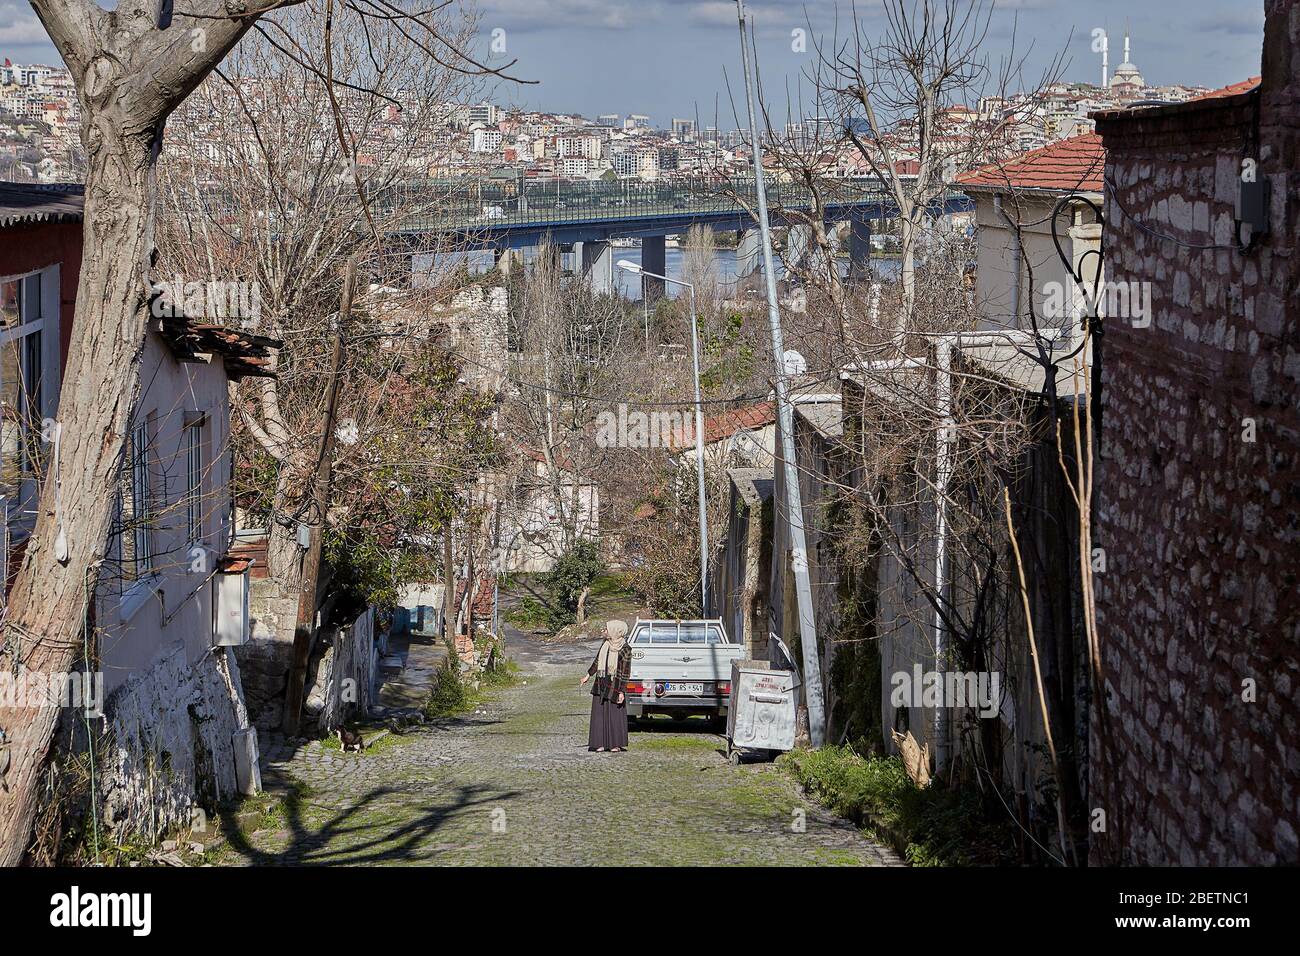 Istanbul, Turkey - February 12, 2020: The residential quarter of Ayvansaray neighborhood in Fatih district, and the Halic Bridge in the background. Stock Photo